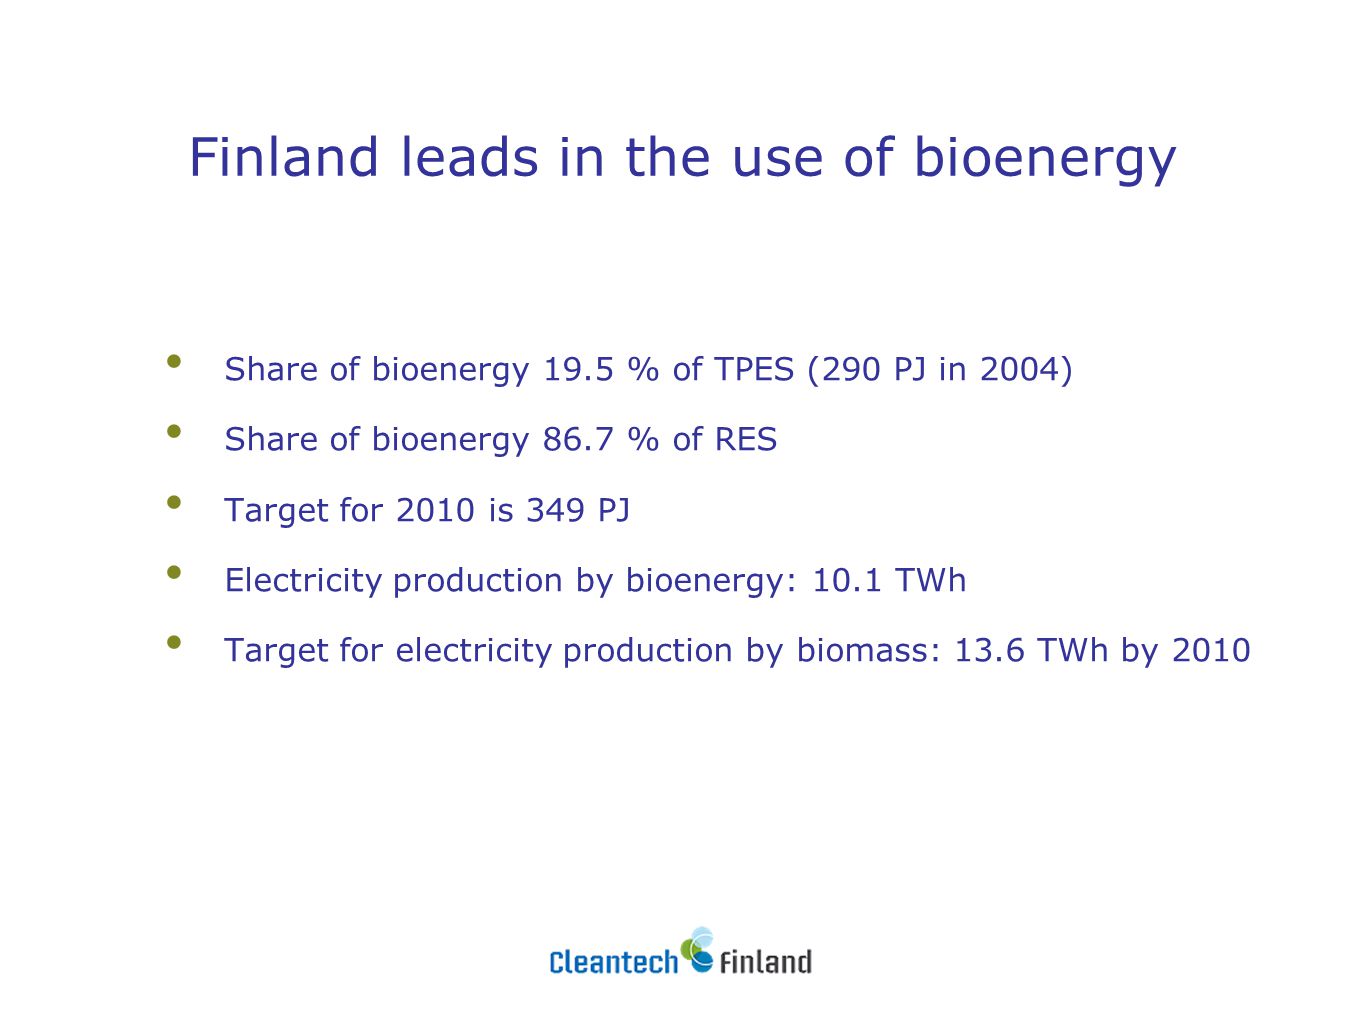 Finland leads in the use of bioenergy Share of bioenergy 19.5 % of TPES (290 PJ in 2004) Share of bioenergy 86.7 % of RES Target for 2010 is 349 PJ Electricity production by bioenergy: 10.1 TWh Target for electricity production by biomass: 13.6 TWh by 2010